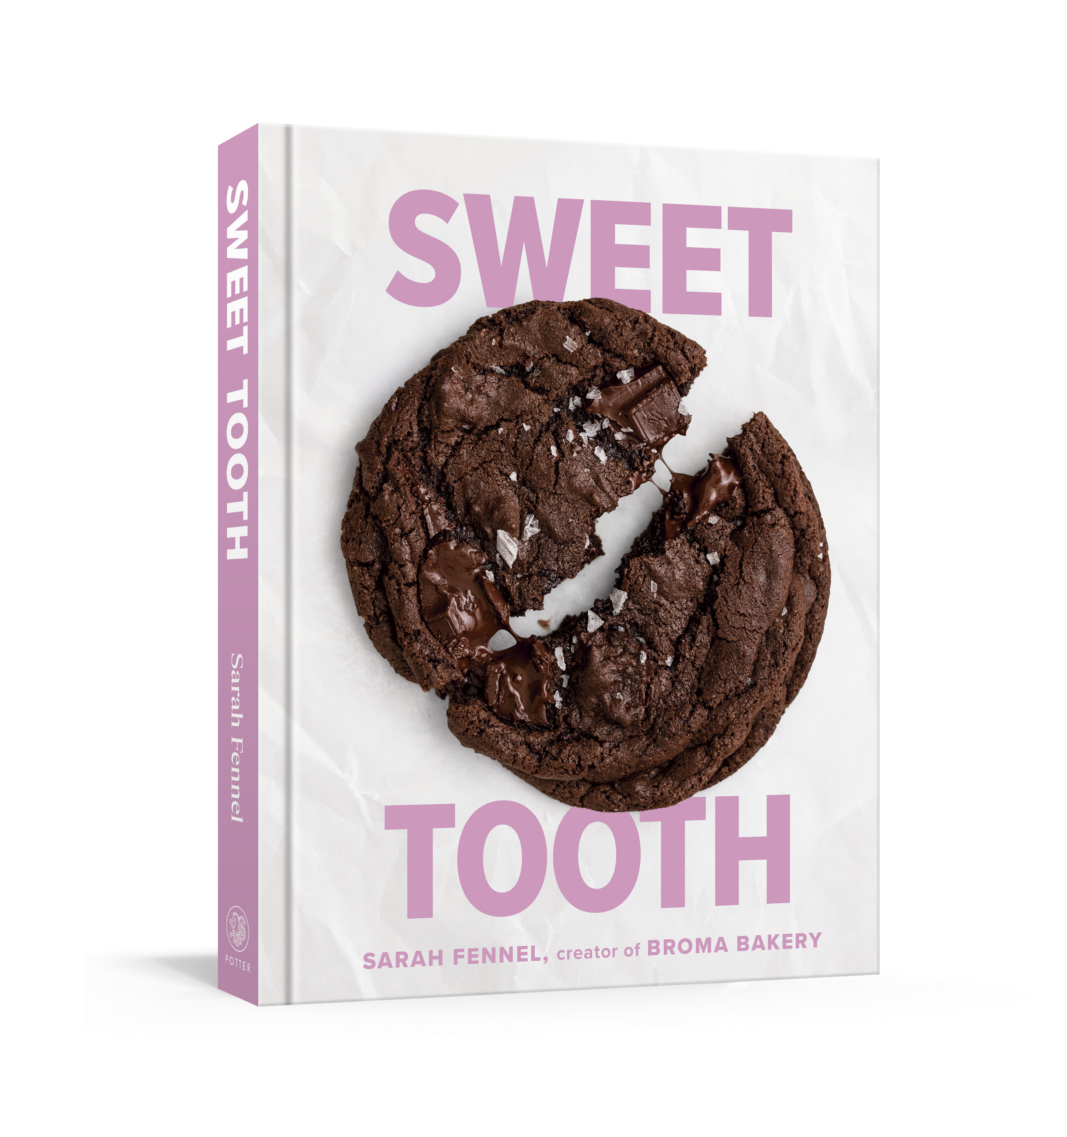 3d cover image of sweet tooth by sarah fennel